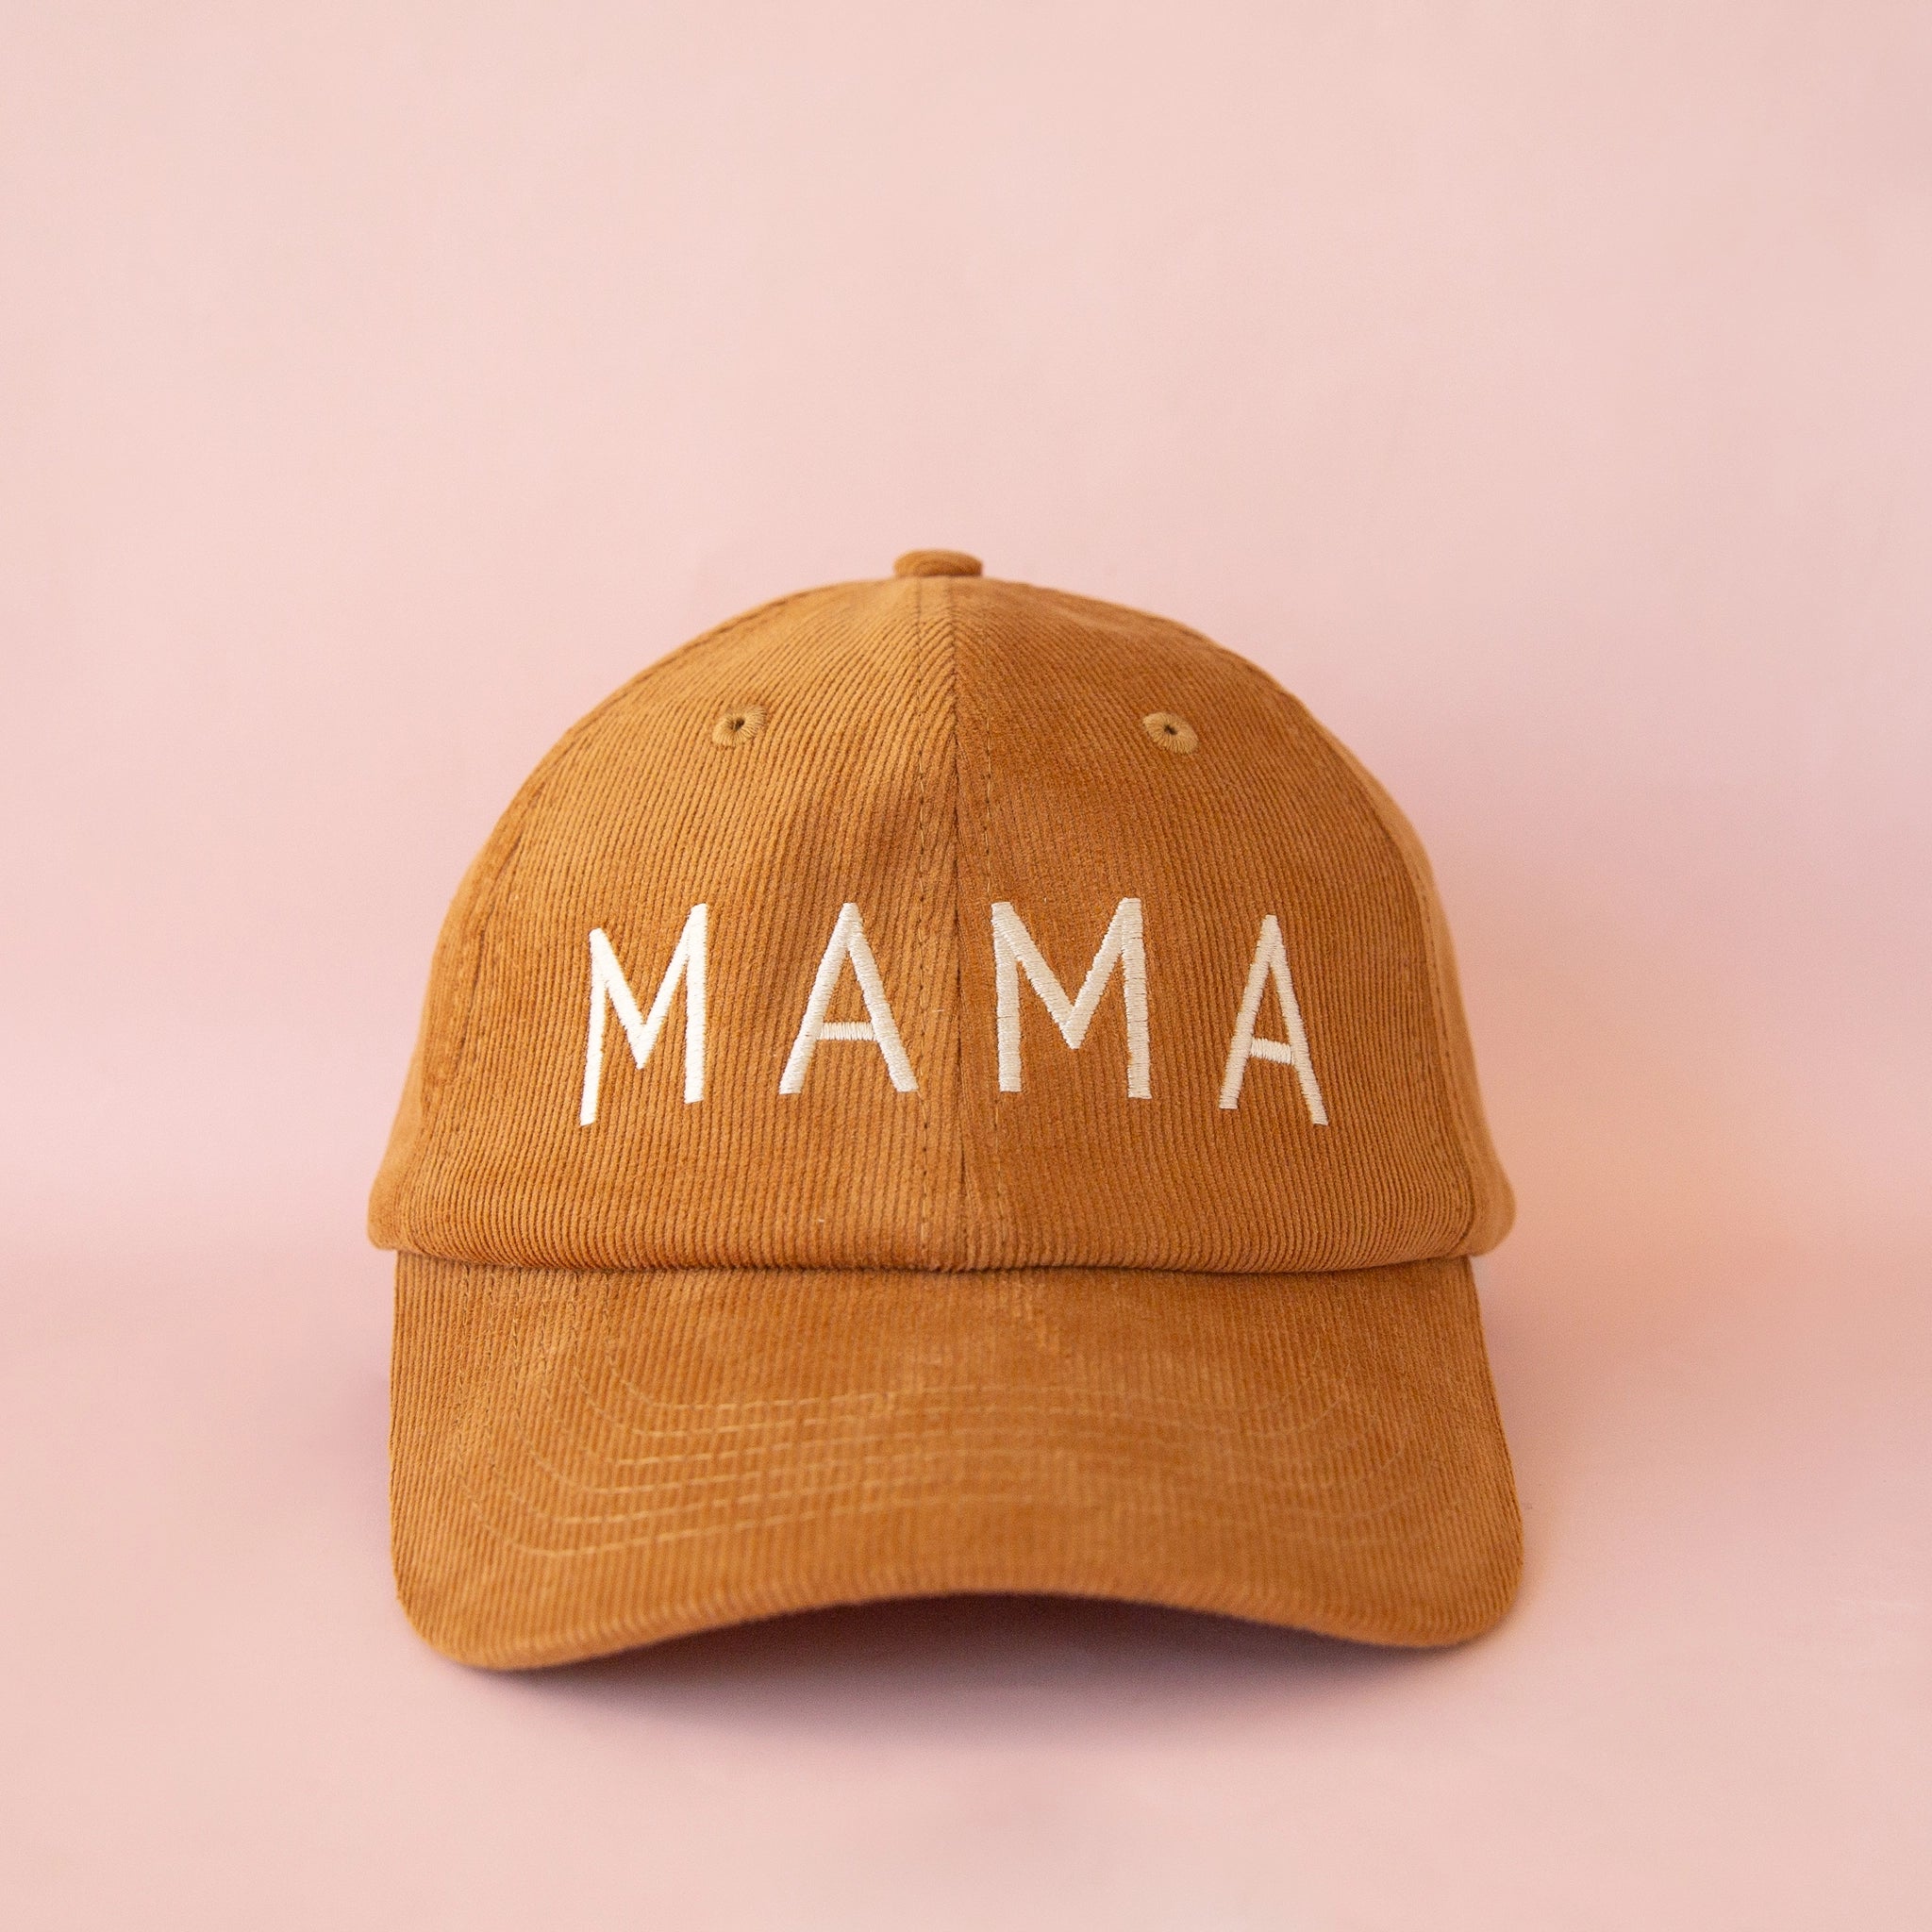 On a pink background is a toffee colored corduroy baseball hat with white embroidered text on the front that reads, &quot;MAMA&quot;.